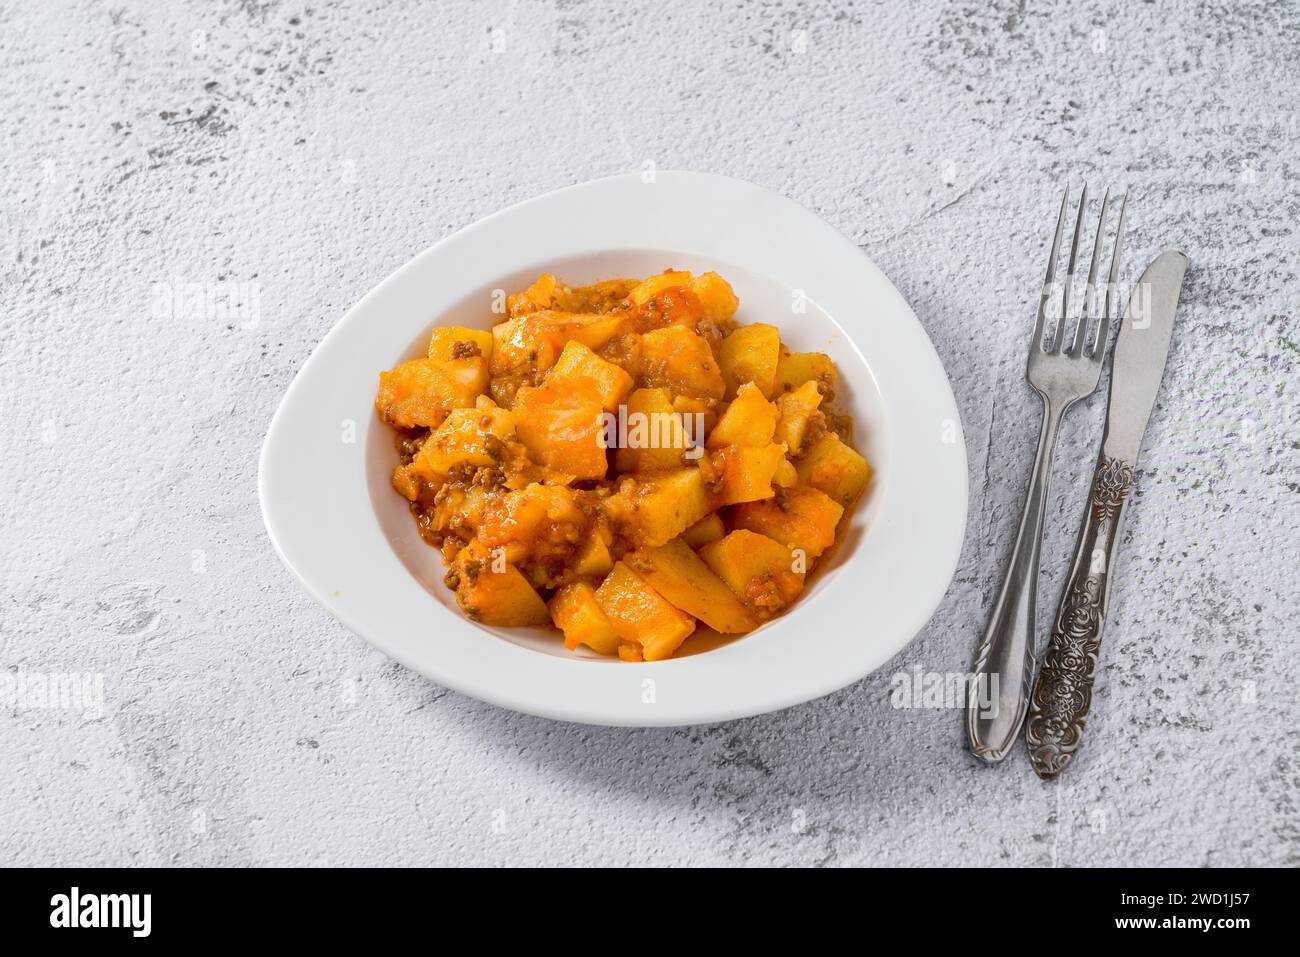 Minced meat and potato dish on white porcelain plate on stone table Stock Photo